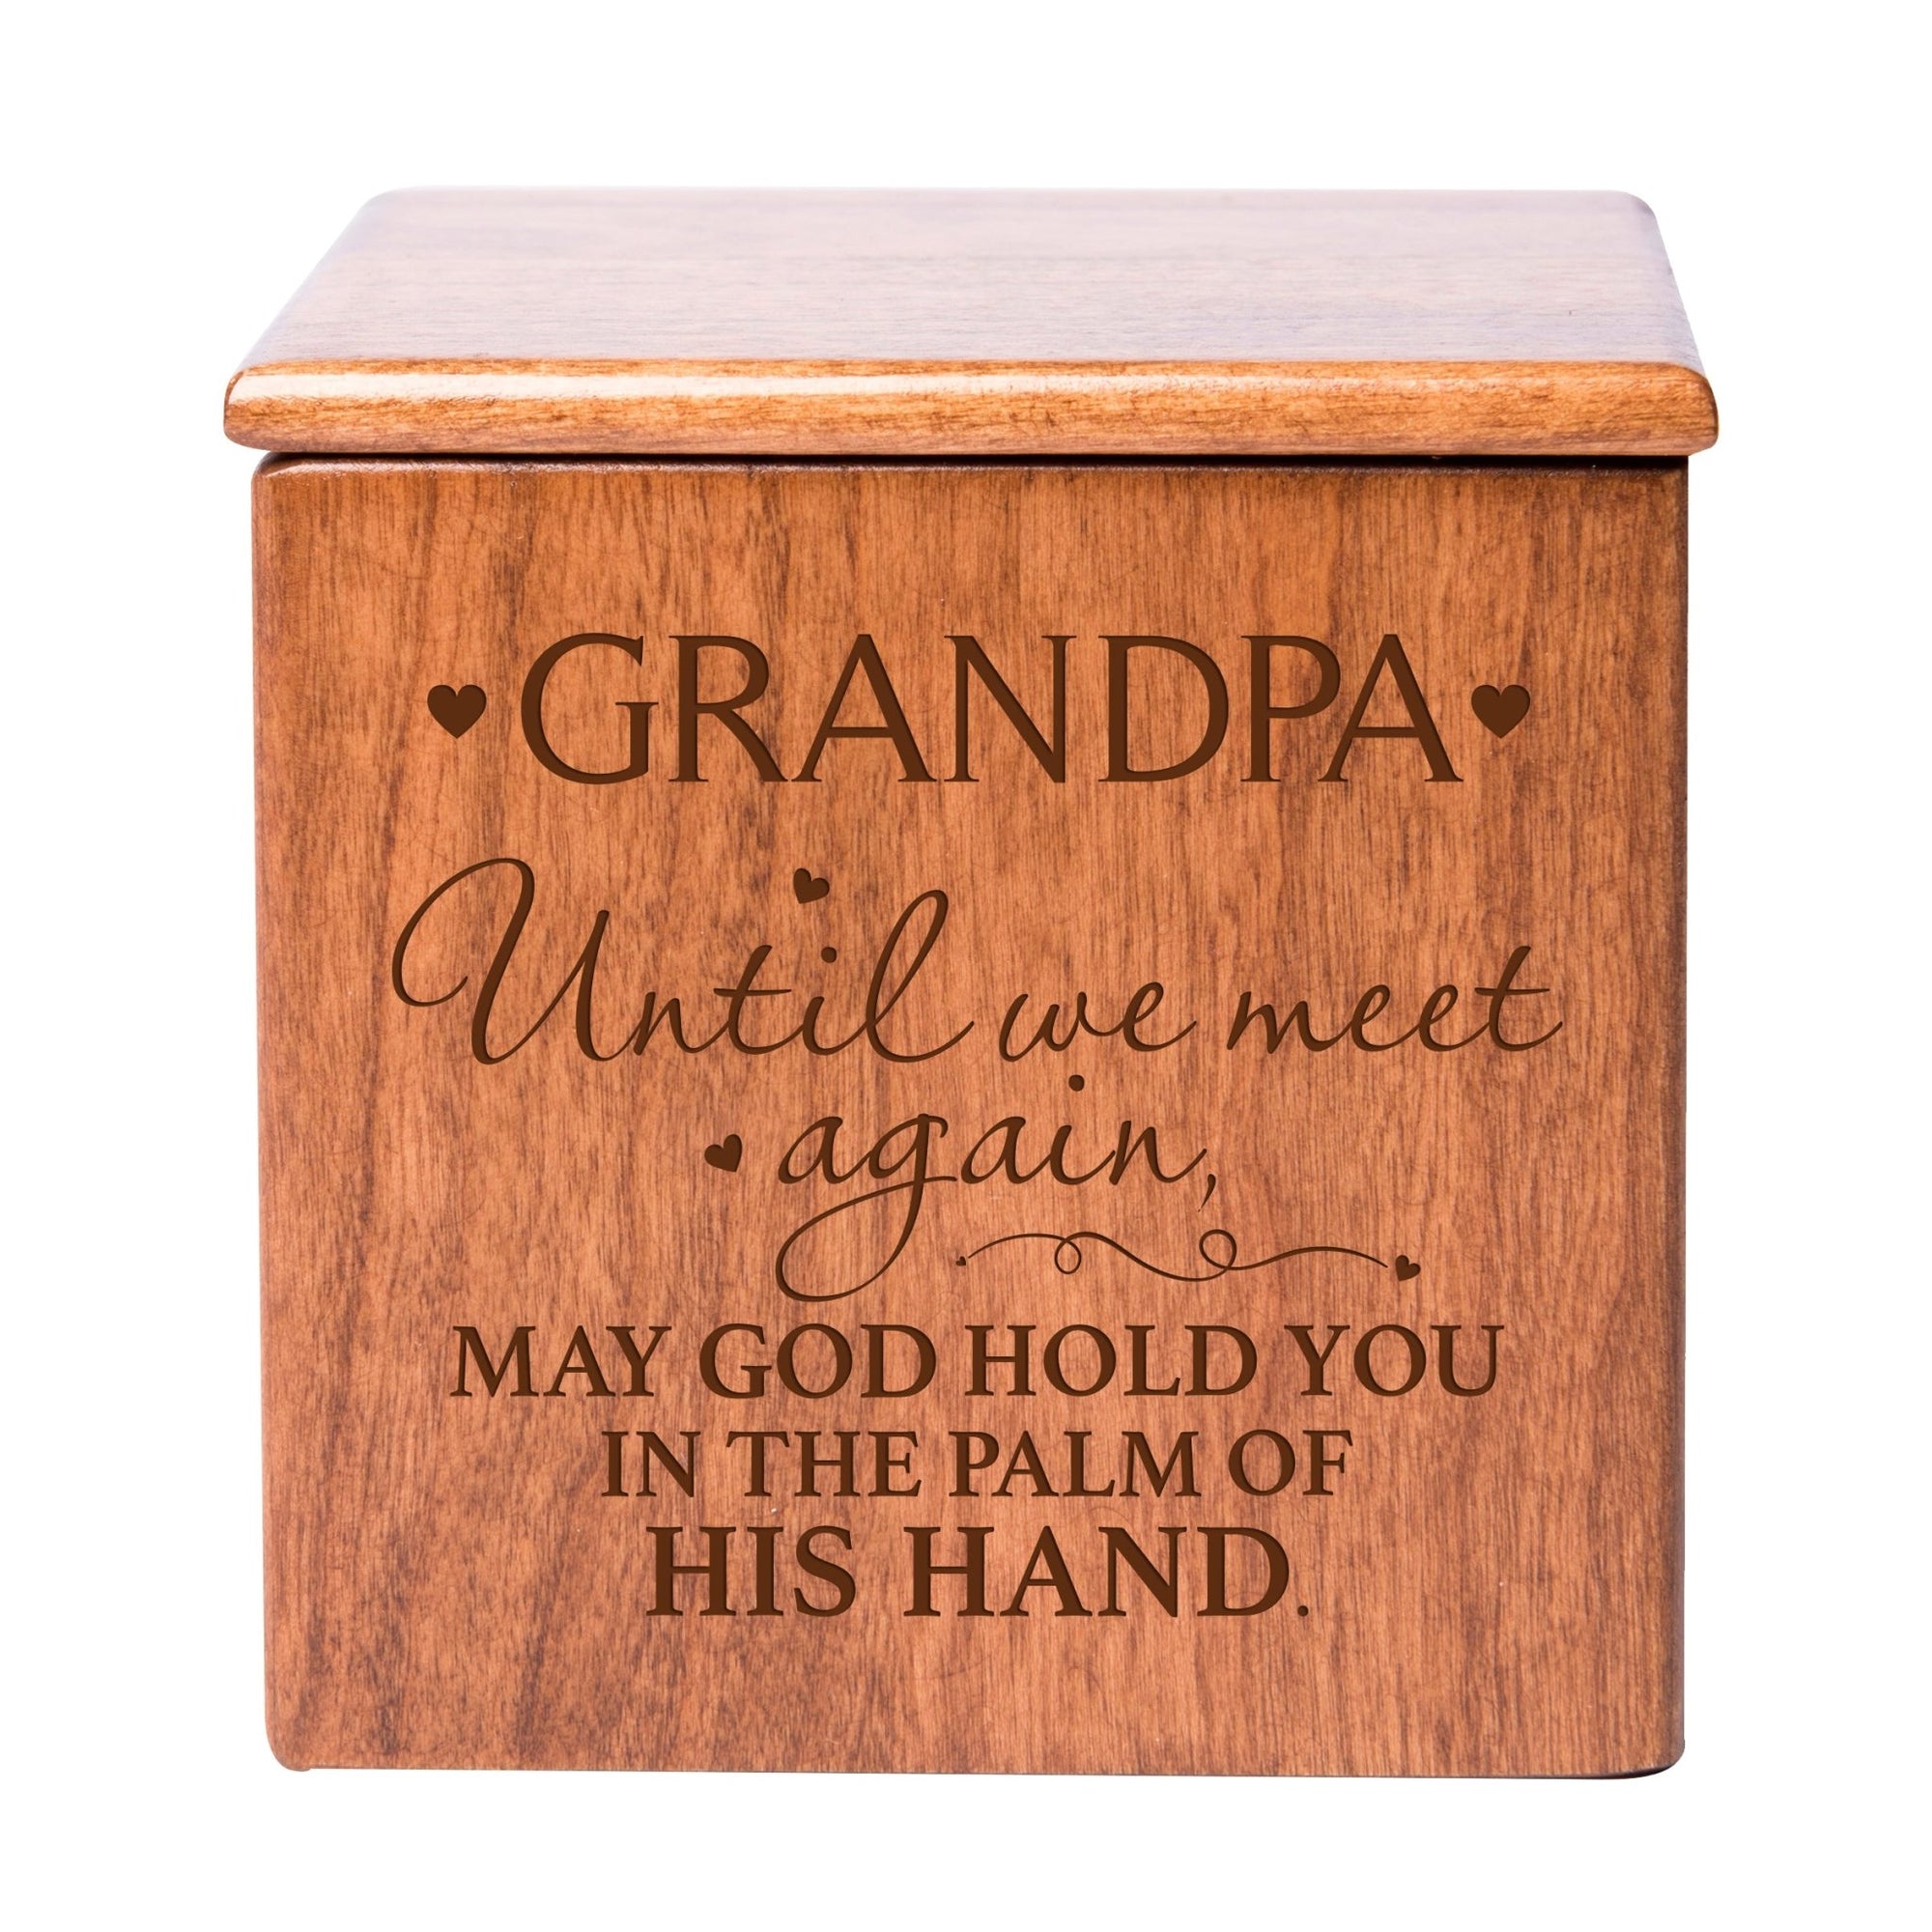 Modern Inspirational Memorial Wooden Cremation Urn Box 4.5x4.5in Holds 49 Cu Inches Of Human Ashes (Until We Meet Again Grandpa) Funeral and Commemorative Keepsake - LifeSong Milestones